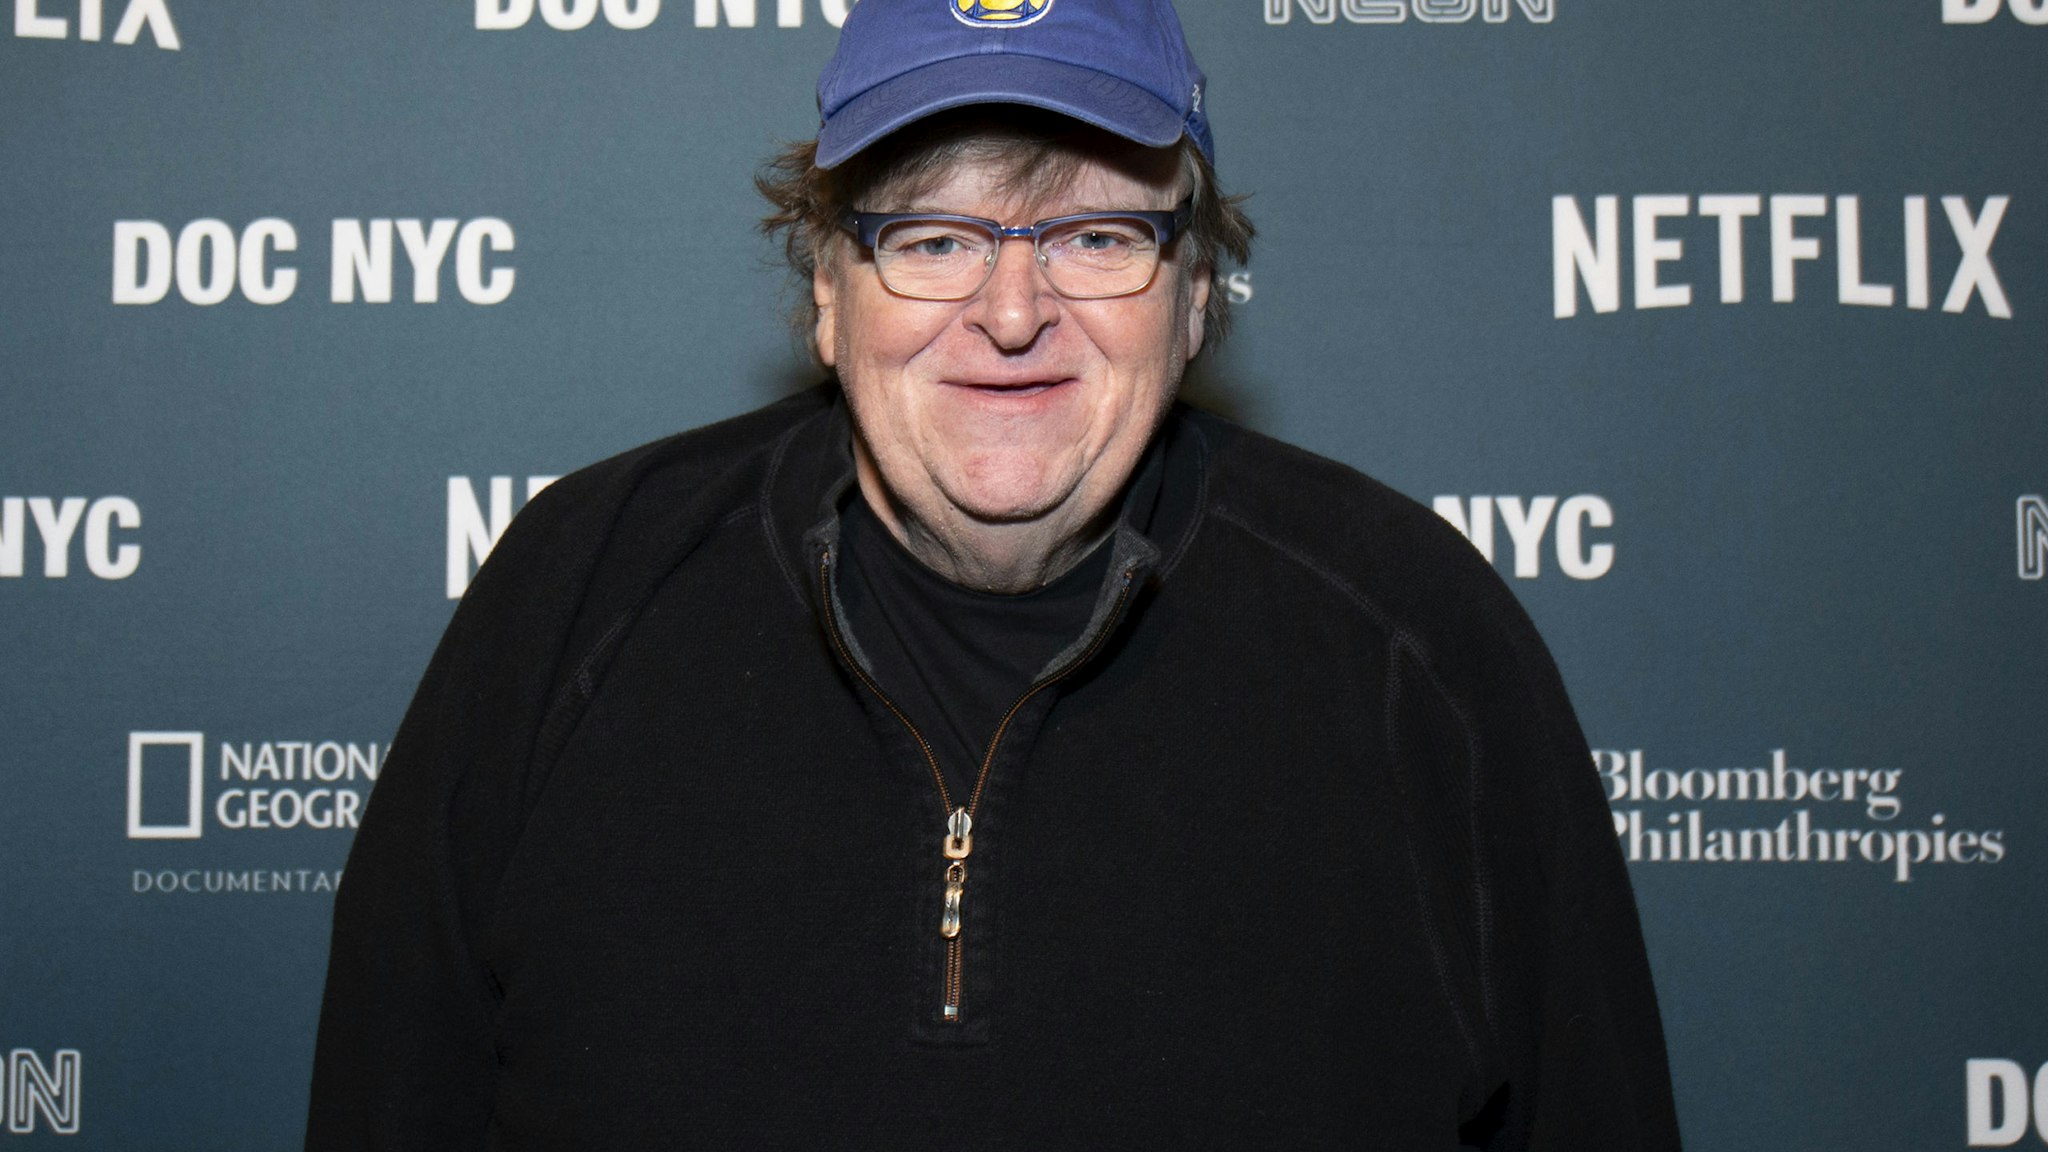 NEW YORK, NEW YORK - NOVEMBER 07: Michael Moore attends the 6th Annual DOC NYC Visionaries Tribute at Gotham Hall on November 07, 2019 in New York City. (Photo by Santiago Felipe/Getty Images)